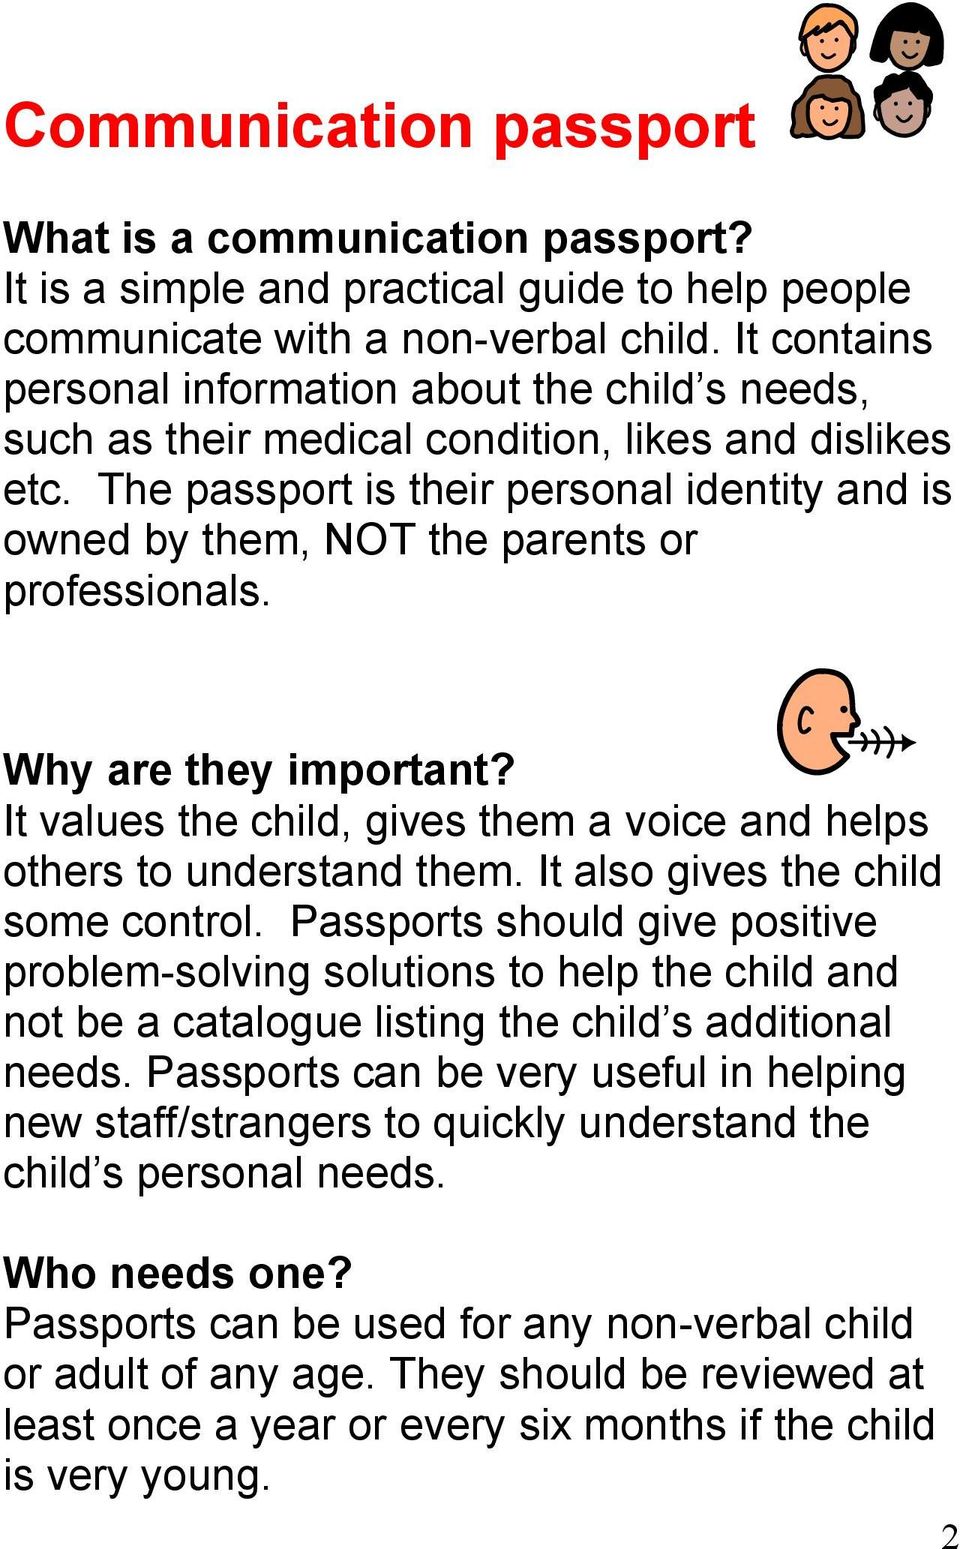 The passport is their personal identity and is owned by them, NOT the parents or professionals. Why are they important? It values the child, gives them a voice and helps others to understand them.